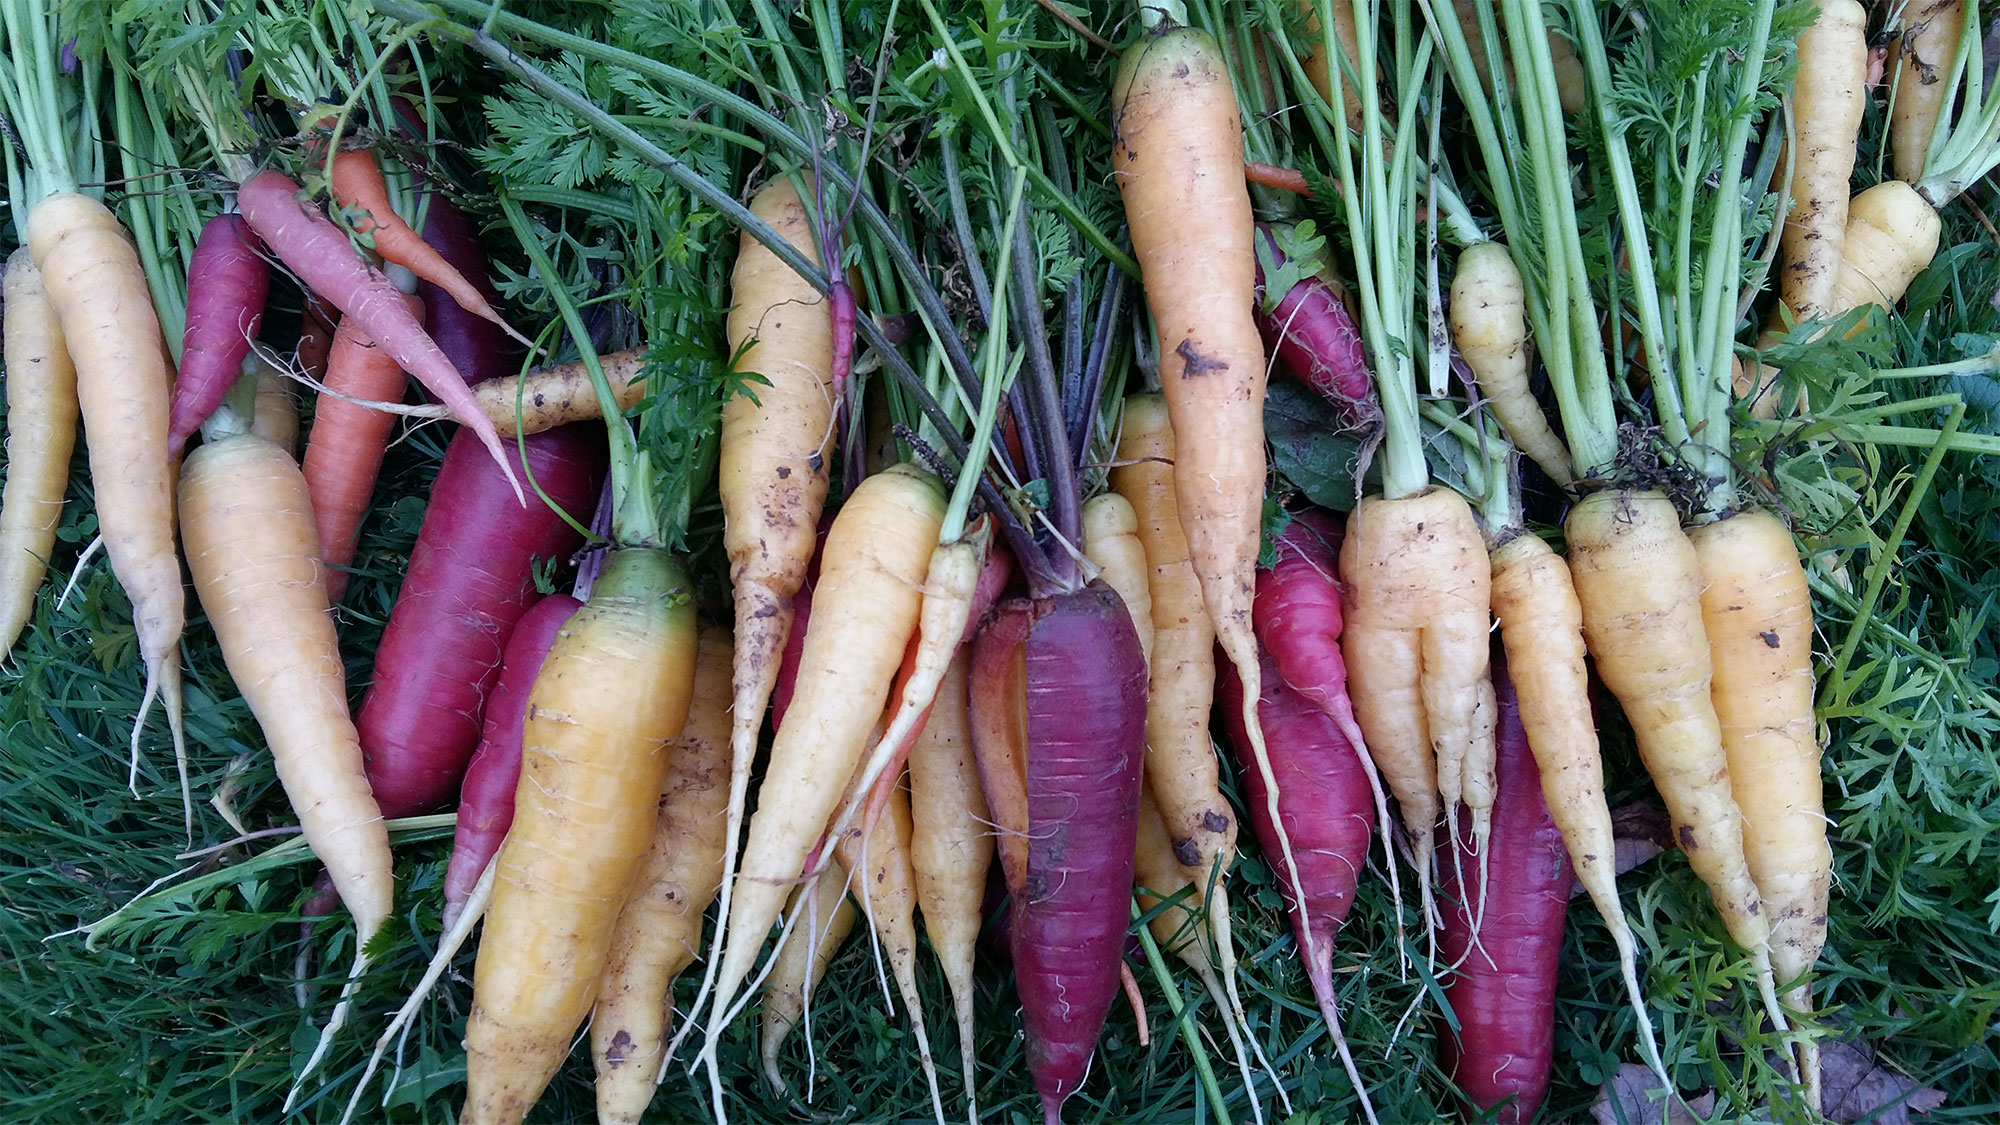 A bunch of carrots of various colors.